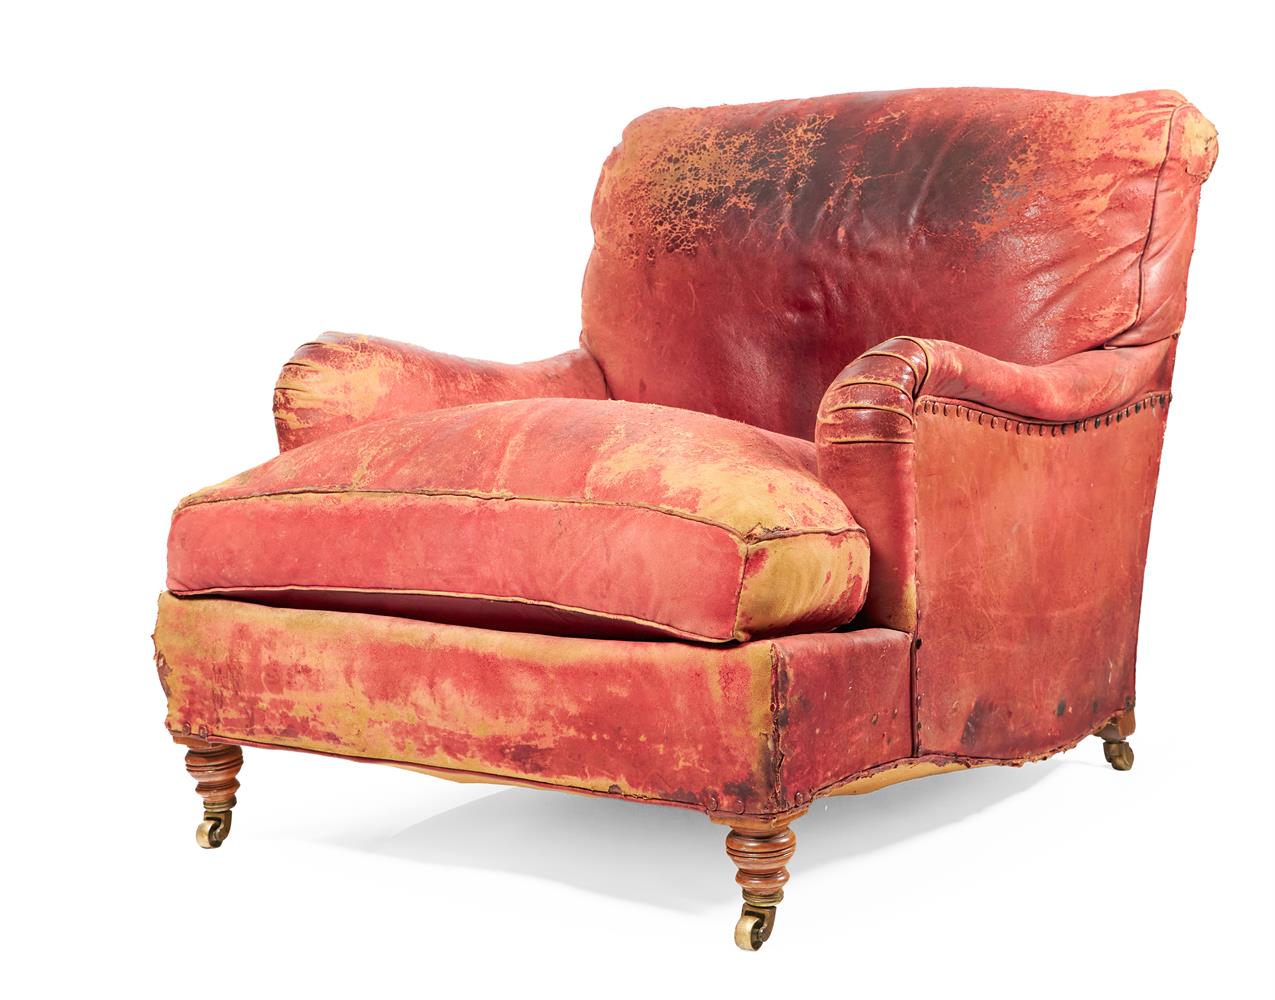 A LATE VICTORIAN WALNUT AND RED LEATHER ARMCHAIR BY HOWARD & SONS, LATE 19TH/EARLY 20TH CENTURY - Image 4 of 5